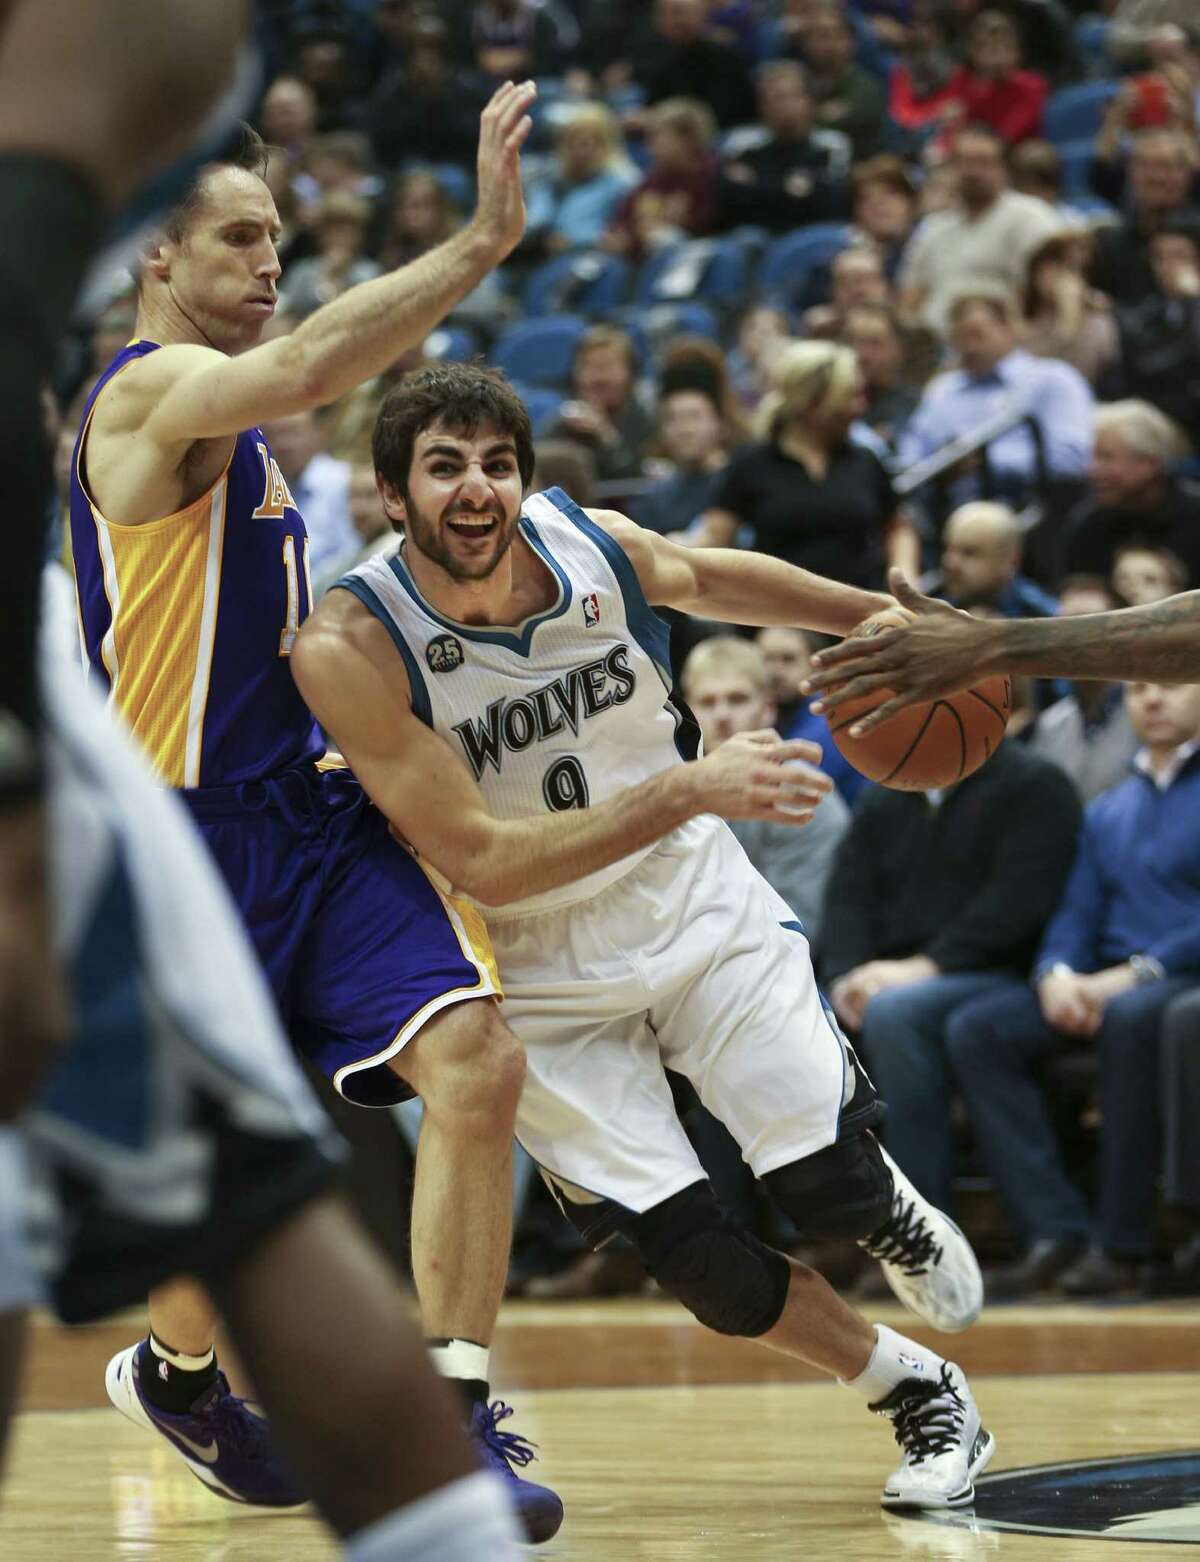 Minnesota guard Ricky Rubio drives past Lakers counterpart Steve Nash during the Timberwolves' 109-99 win. It was Nash's first game since Nov. 10.